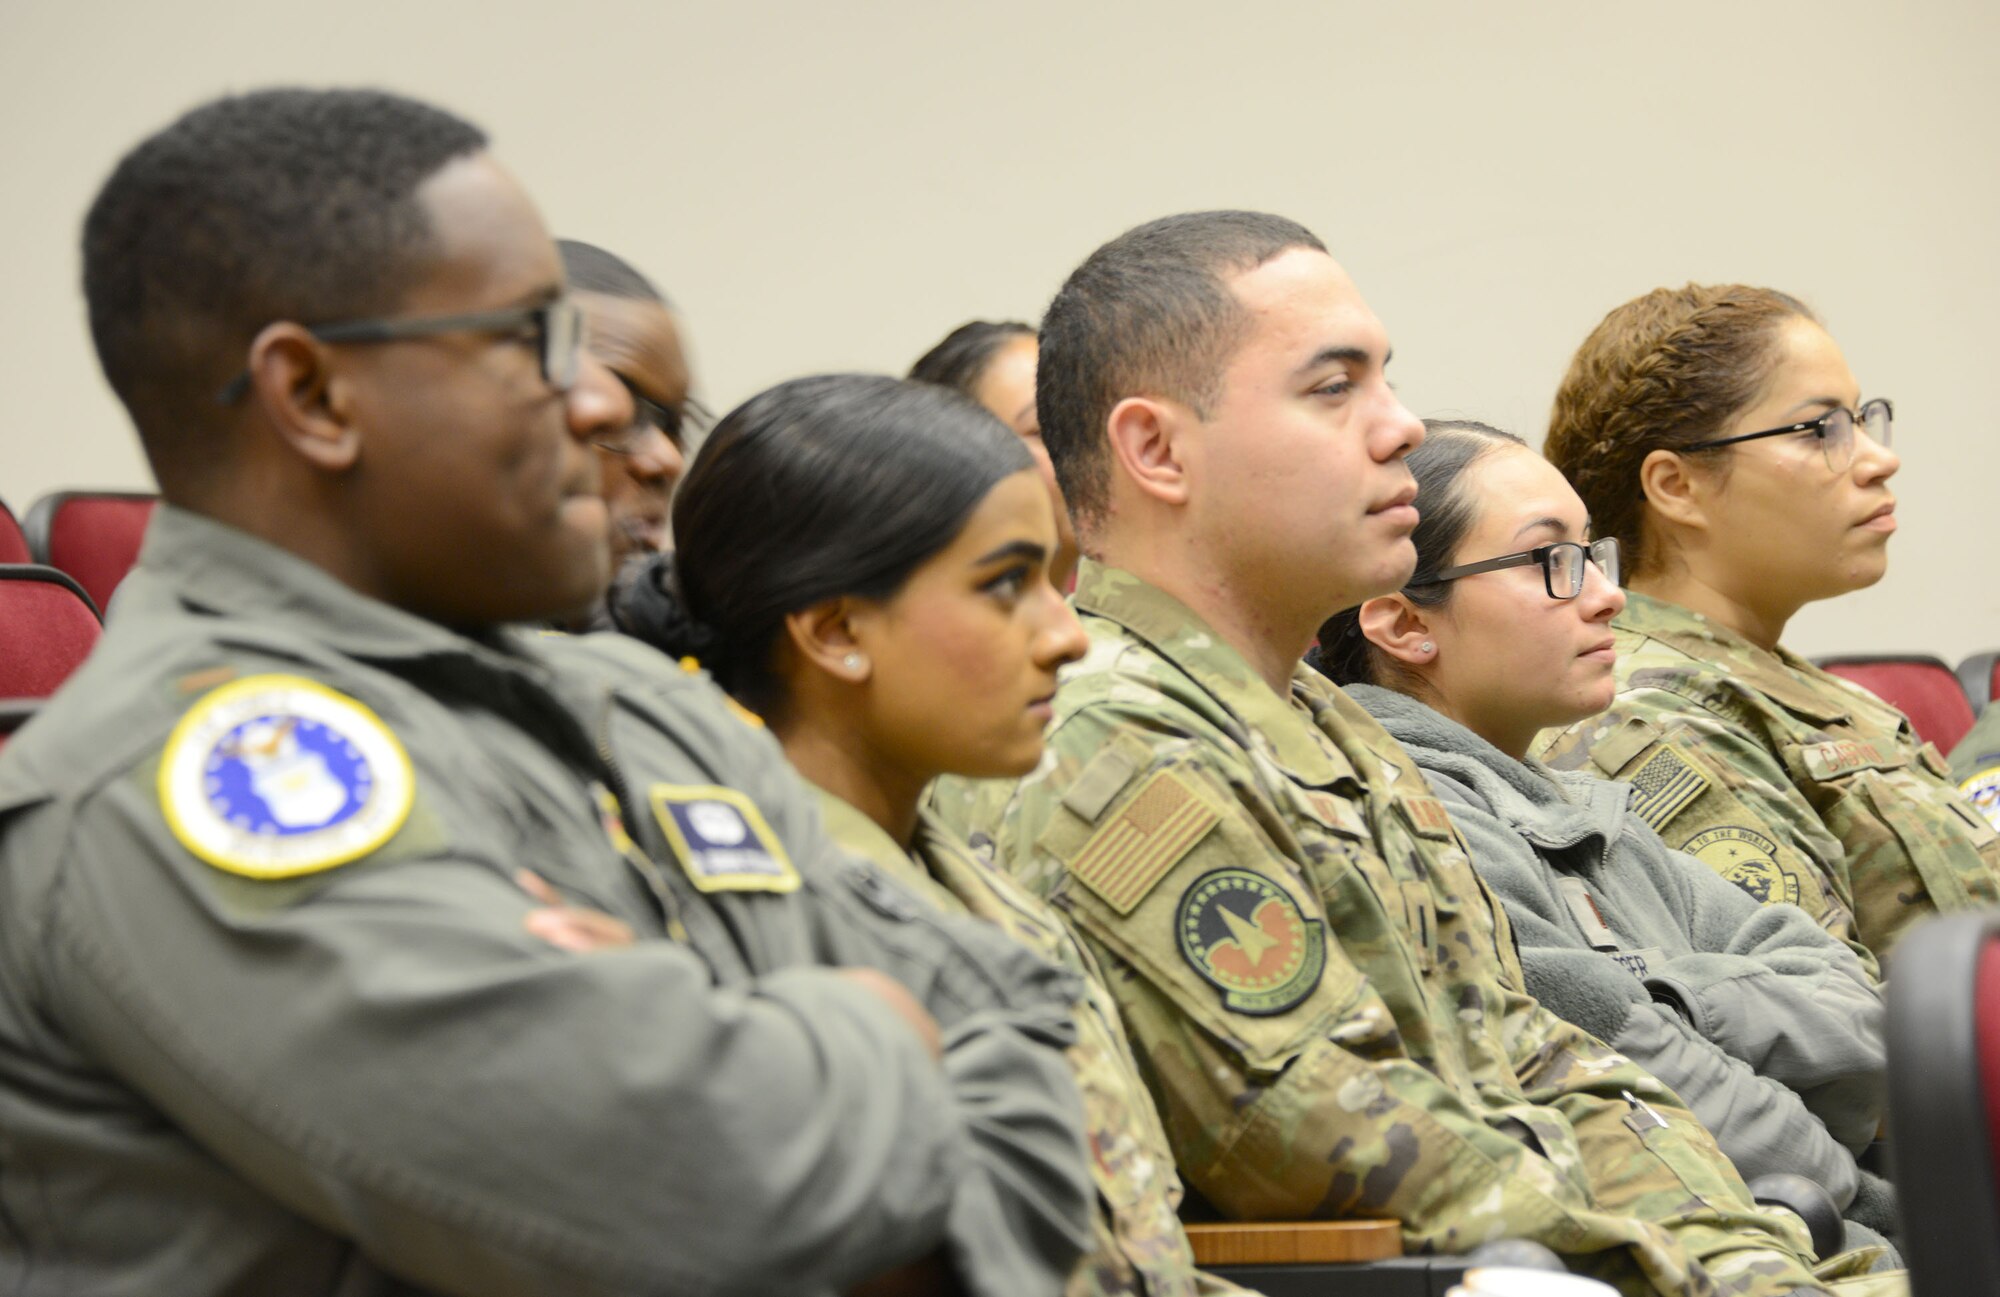 A group of Air Force mentors attend a training session given by Air Force Recruiting Service's Detachment 1 during an Aim High outreach event at Maxwell Air Force Base, Alabama, Nov. 15, 2019.